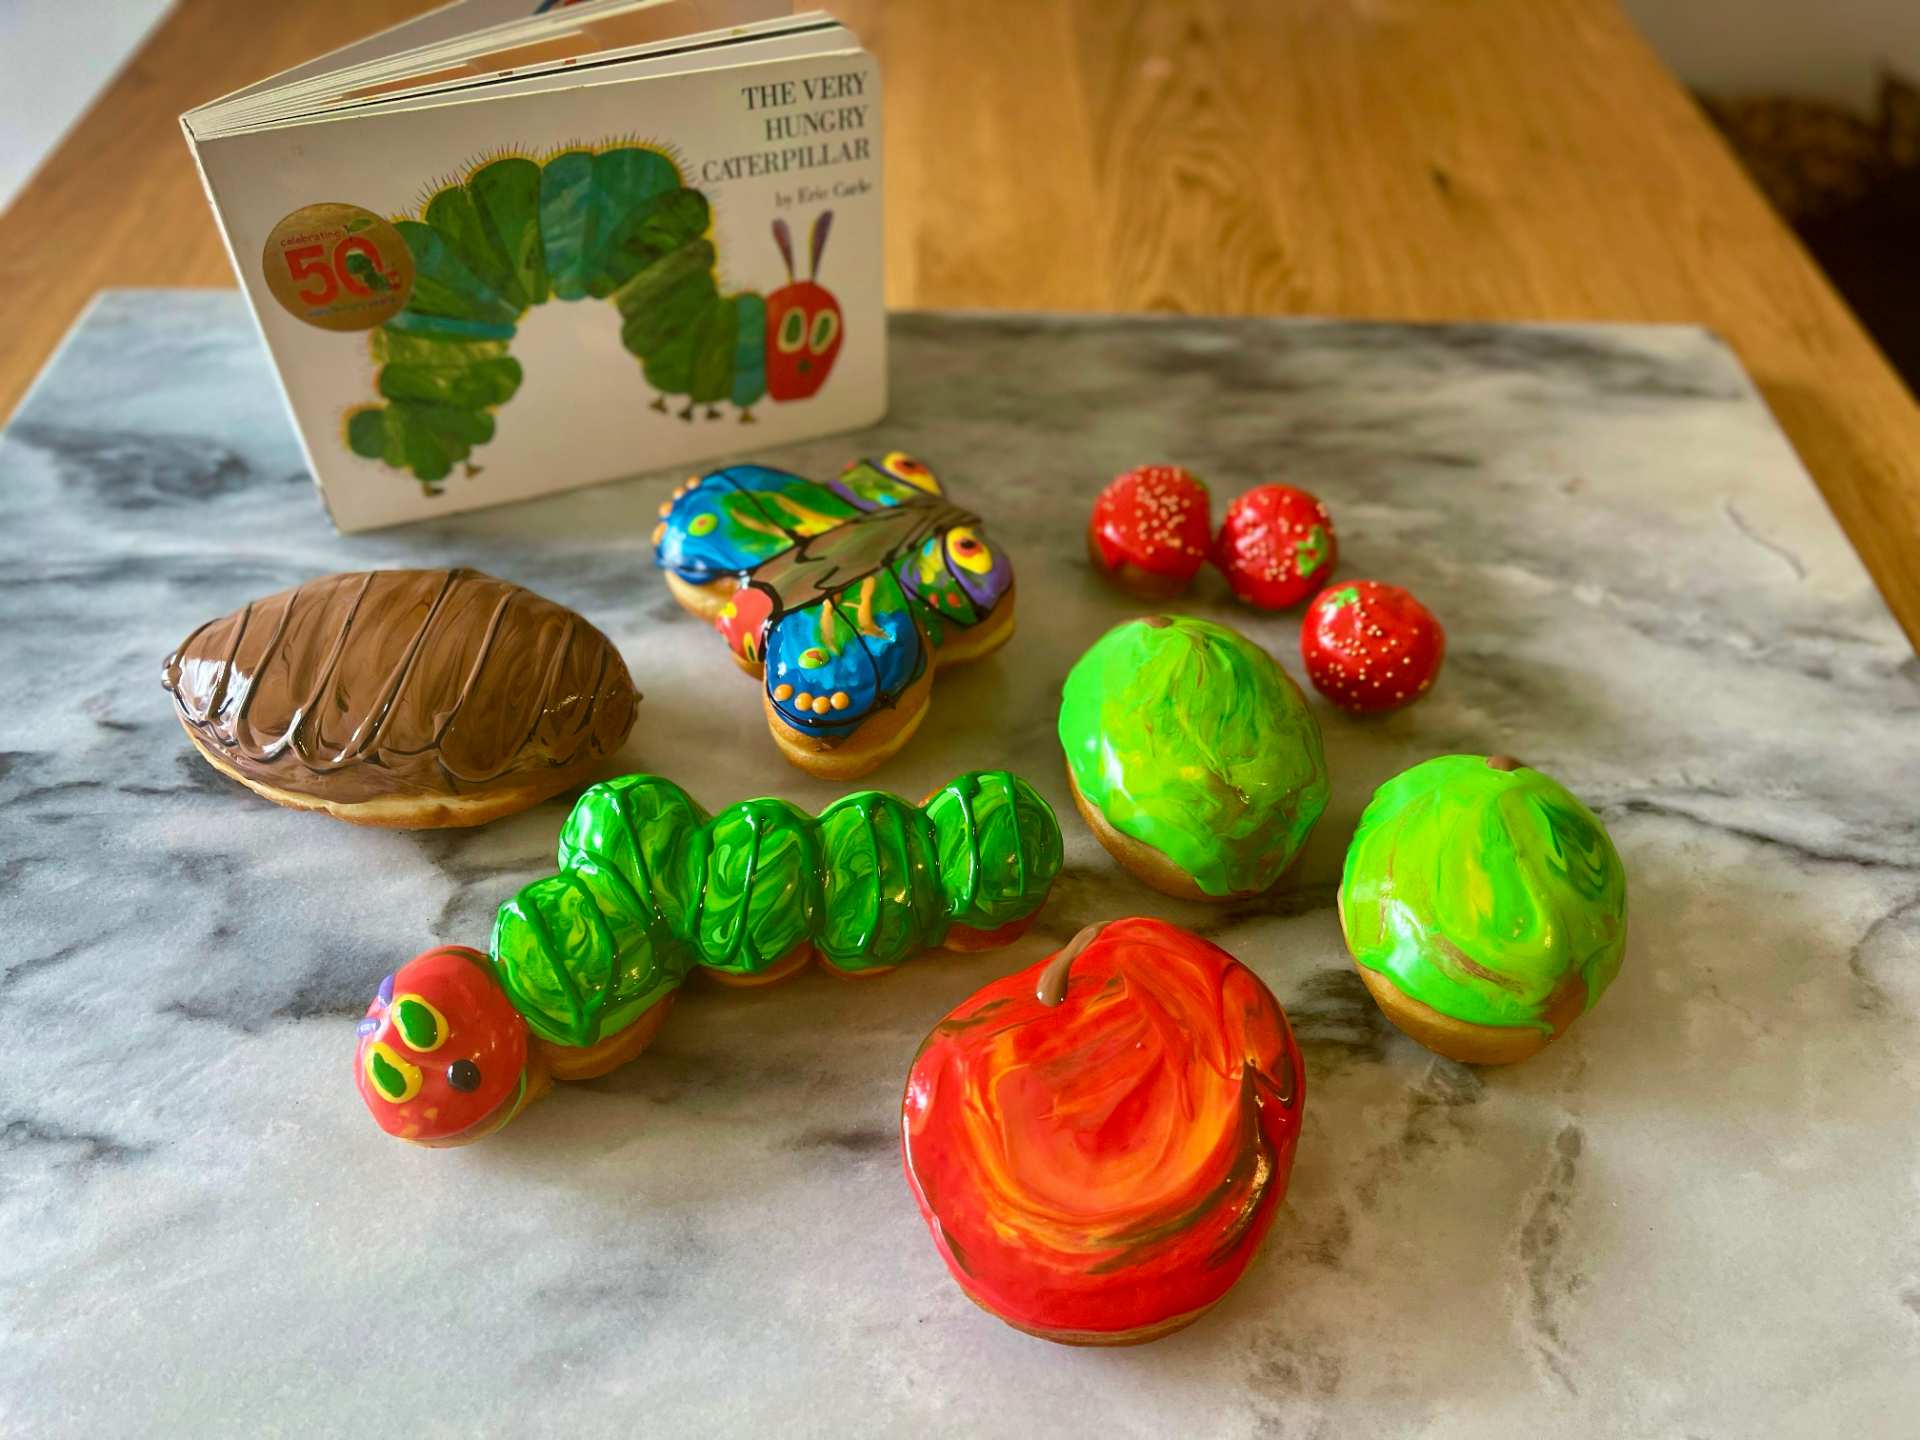 Best doughnuts in Toronto | The Very Hungry Caterpillar doughnuts from Letterbox Doughnuts